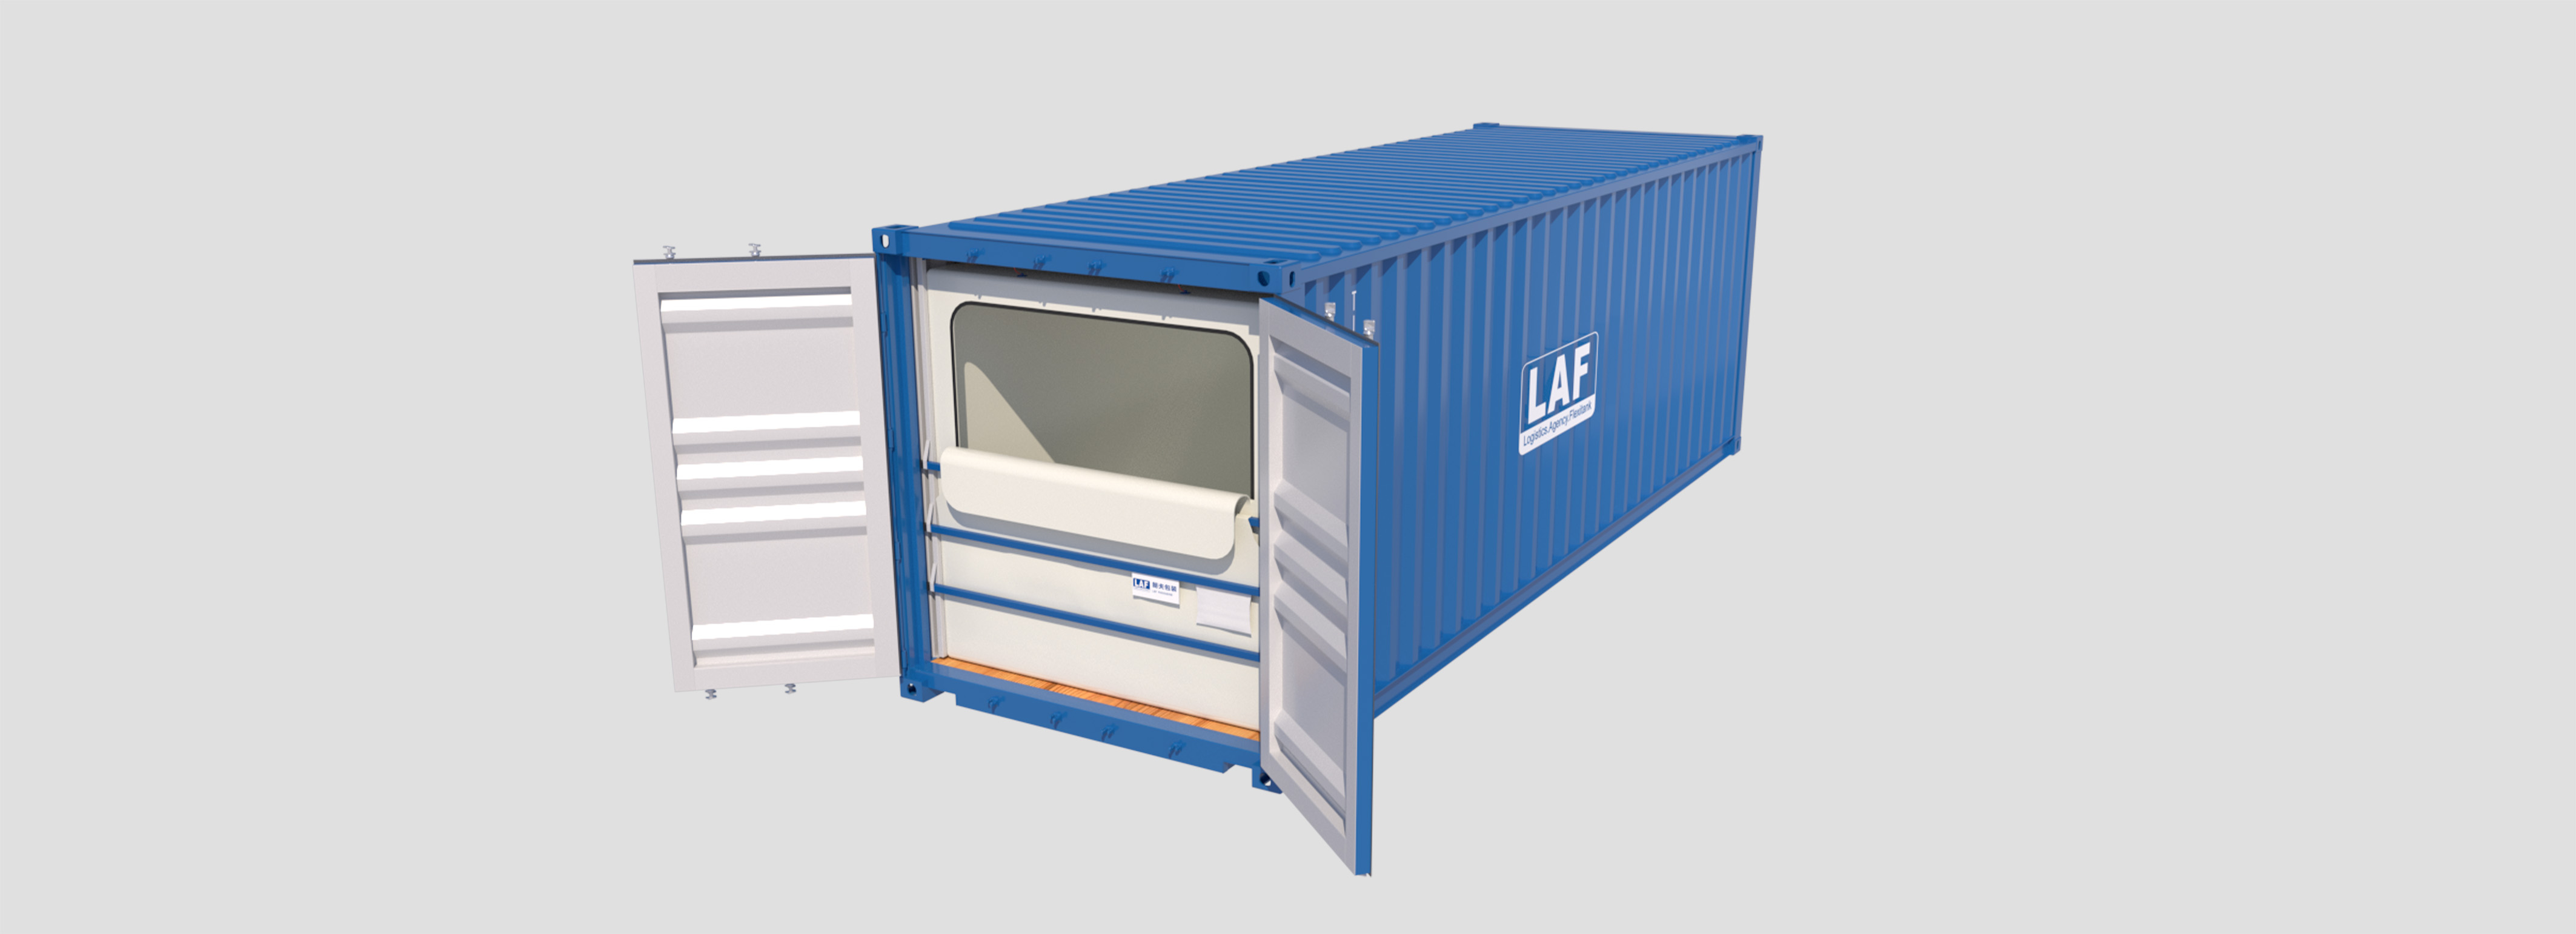 20′ FT Dry Bulk Container Liner for Fish Meal from China manufacturer - LAF